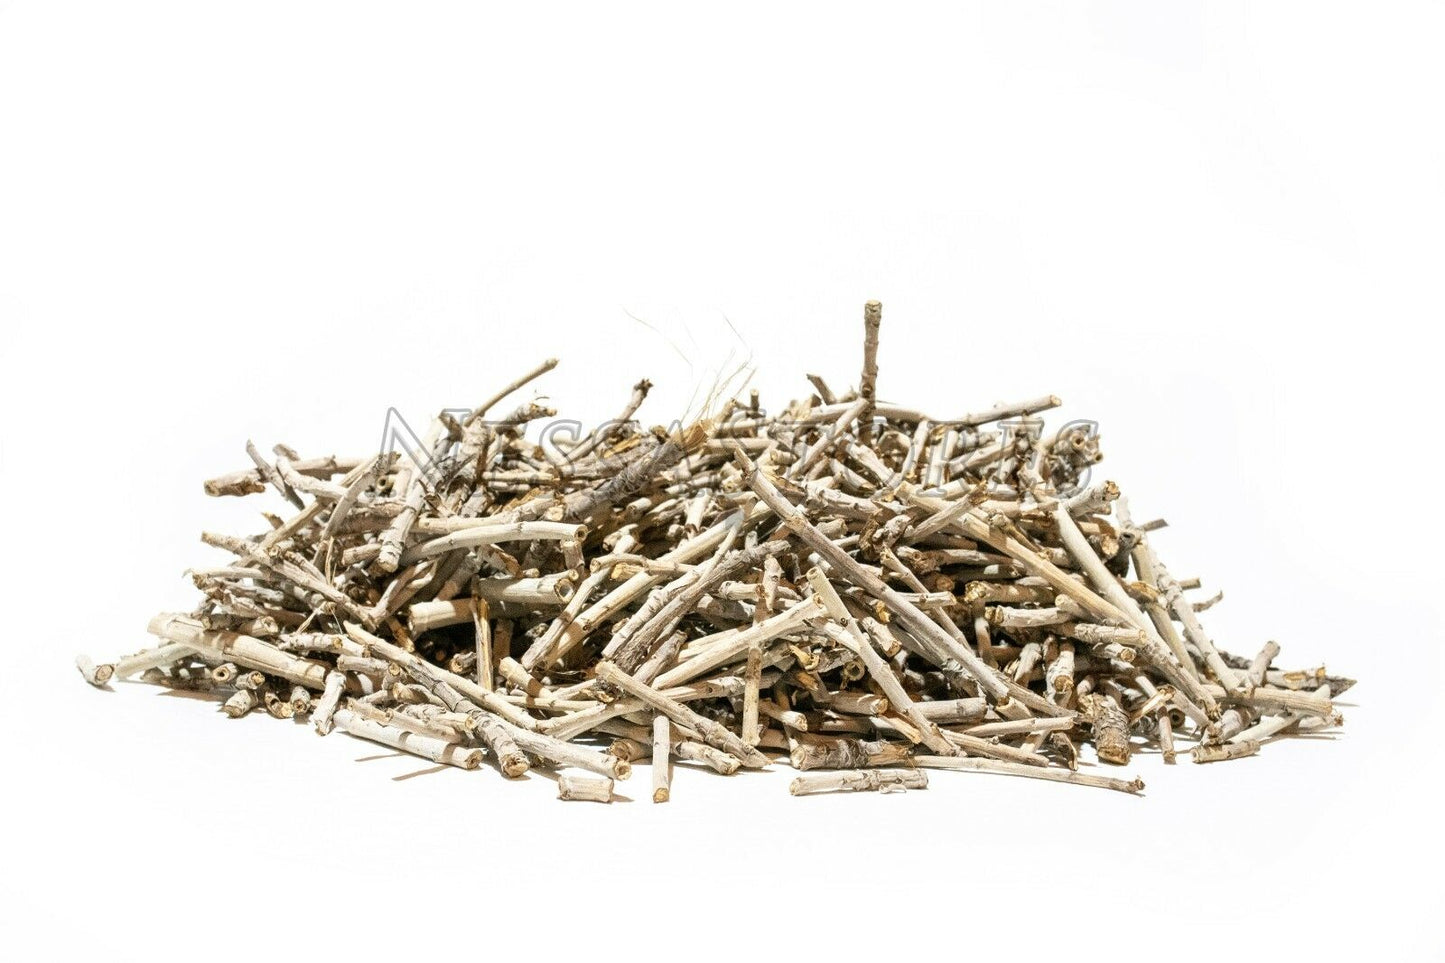 NessaStores California White Sage Herb Incense Stems Only (1/4 lb) #JC-095